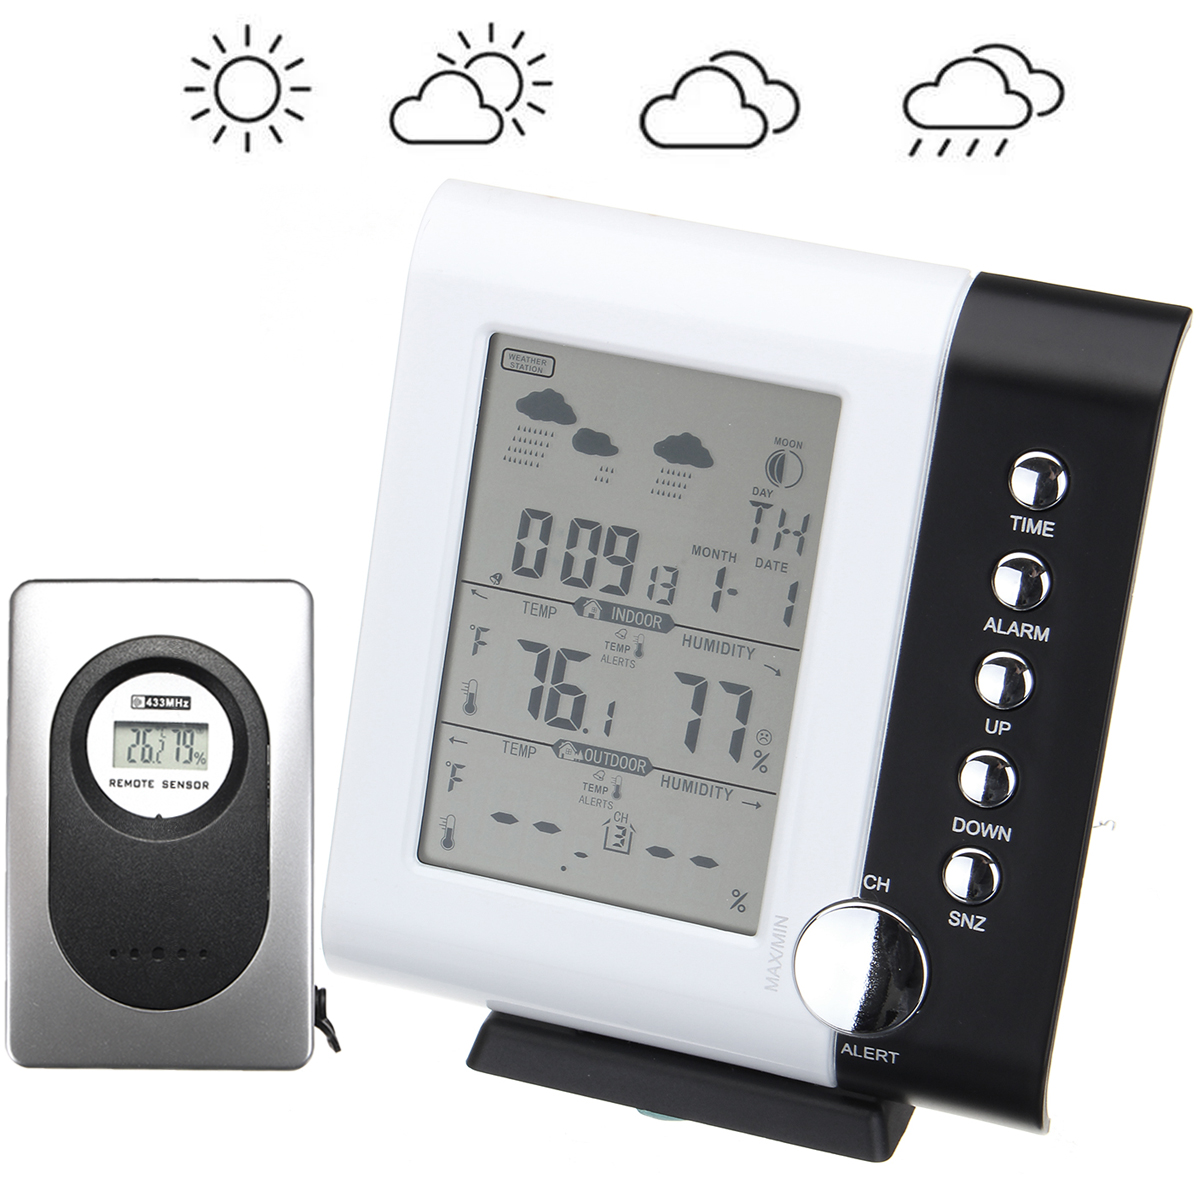 

LCD Display Wireless Weather Station Digital Temperature Humidity Tester